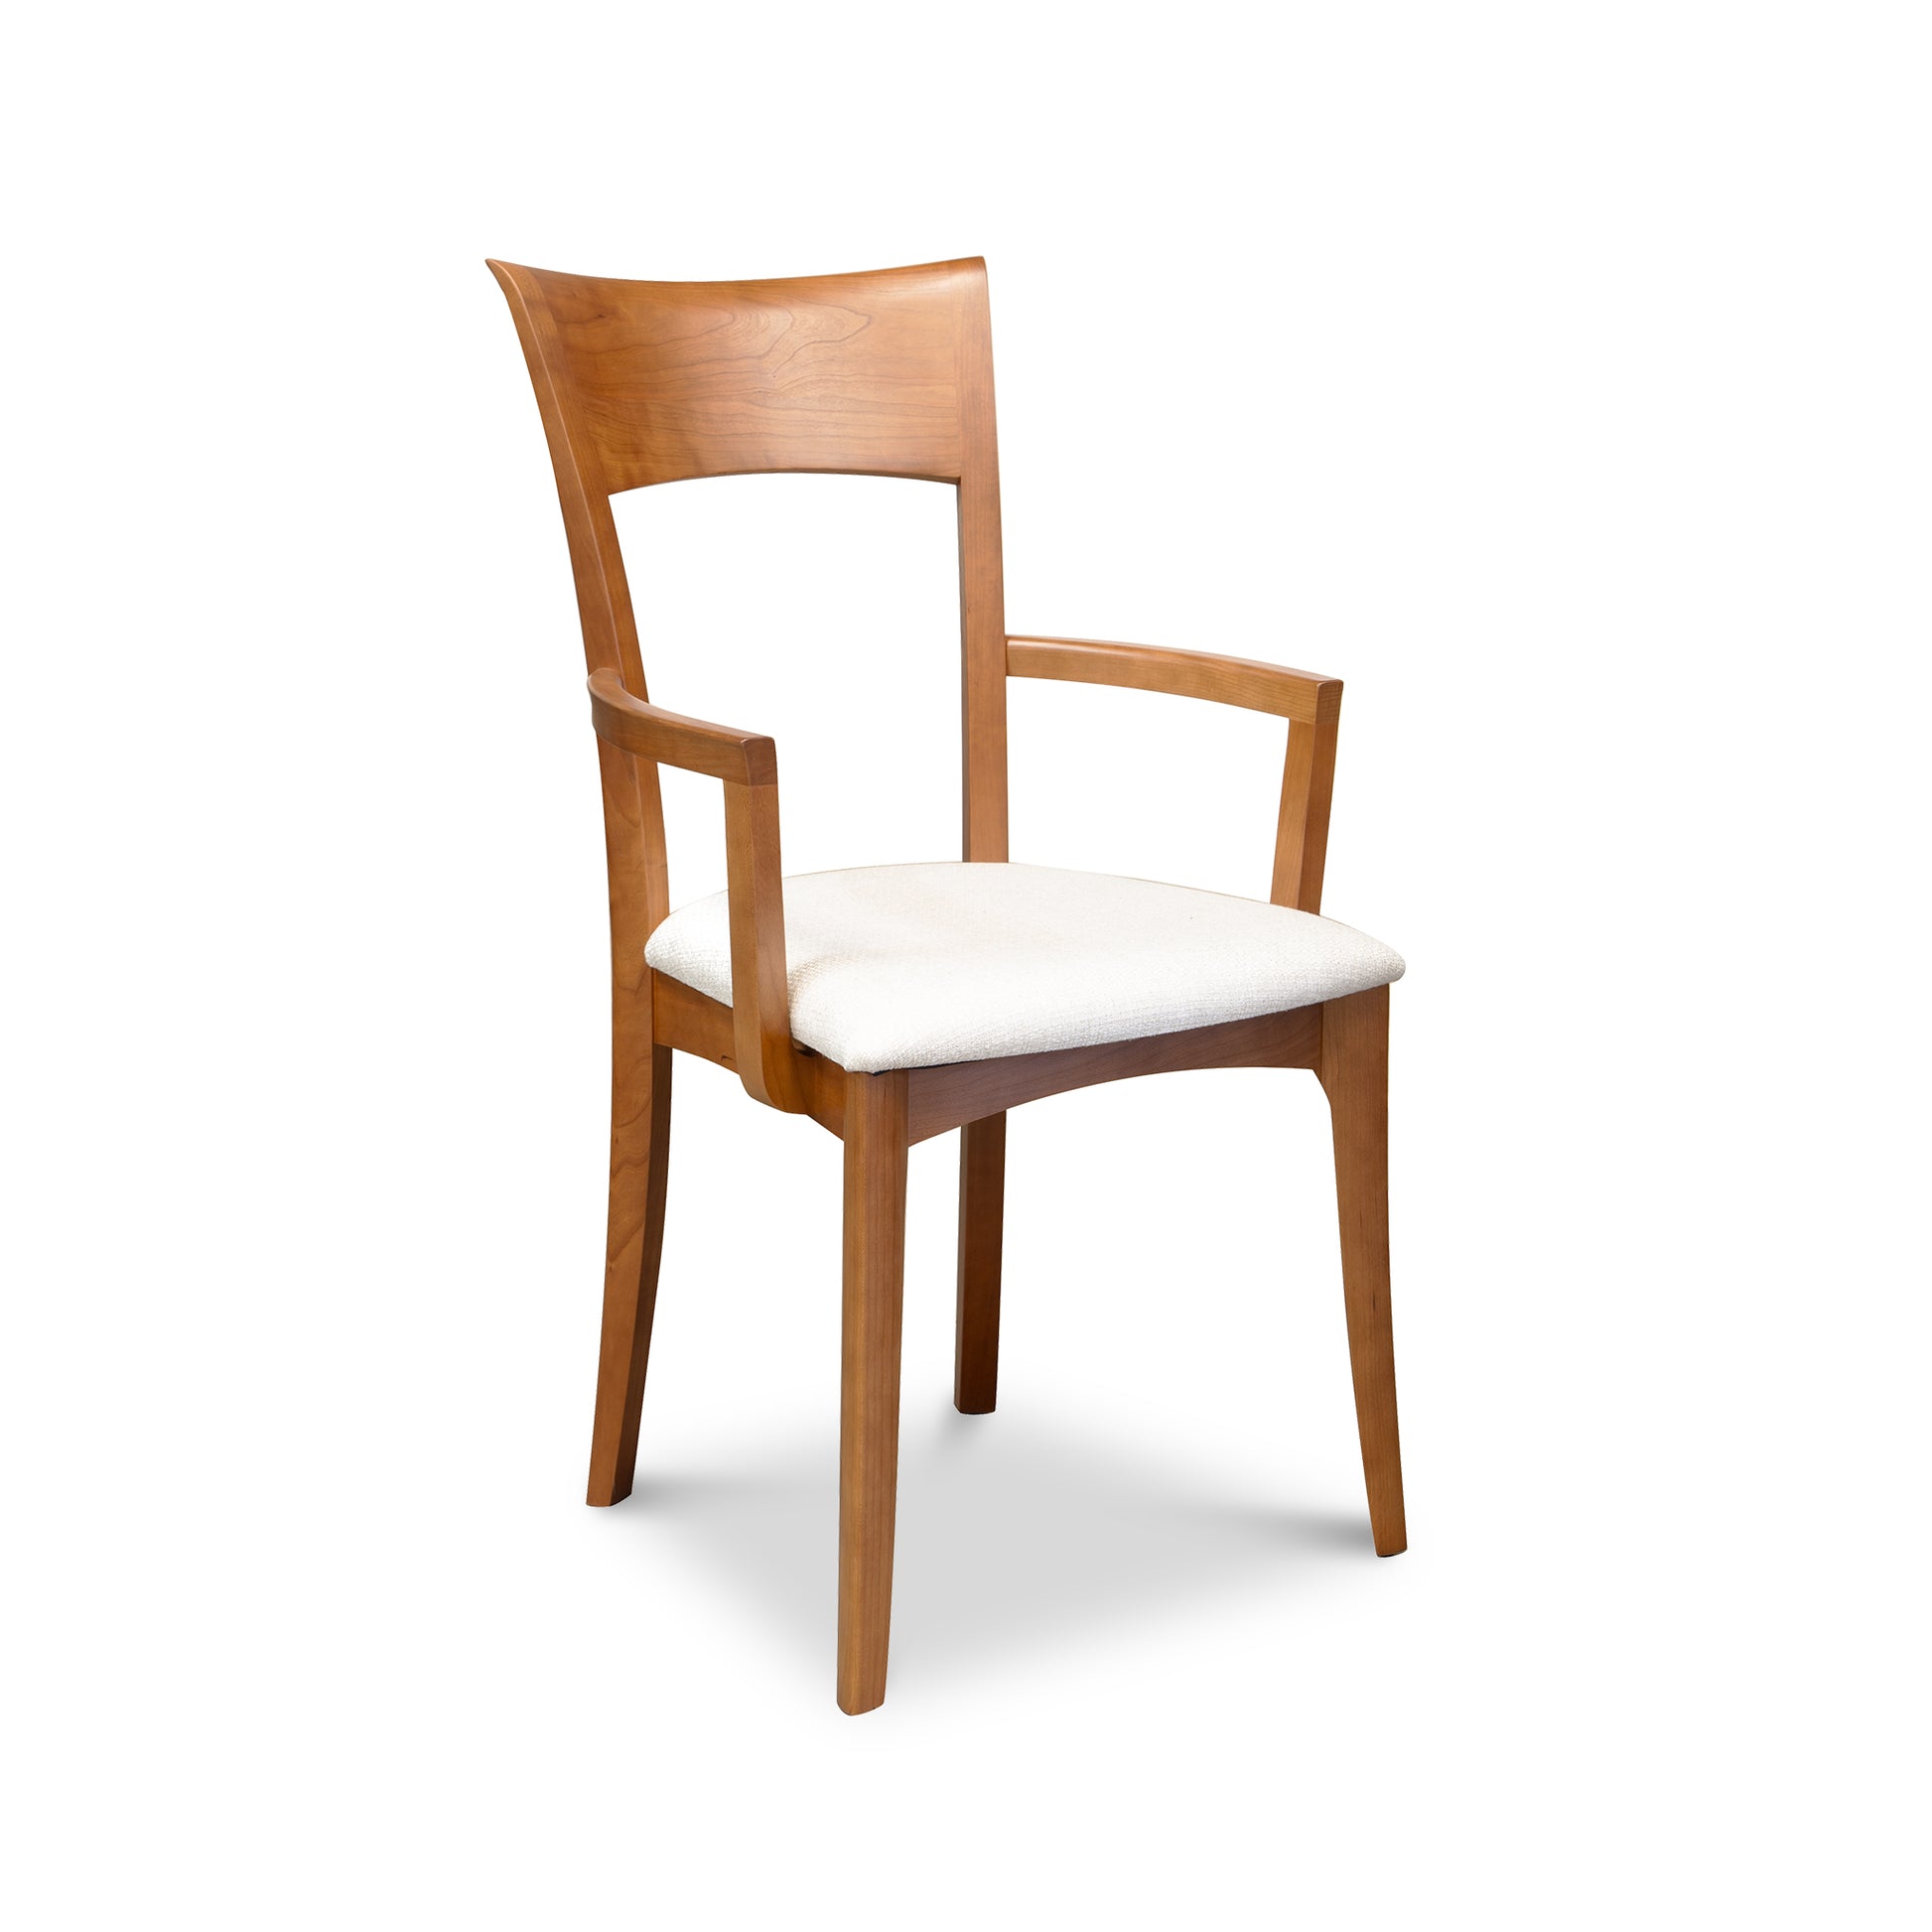 An Ingrid Shaker Dining Chair 6-Piece Set - Clearance from Copeland Furniture with a white upholstered seat.